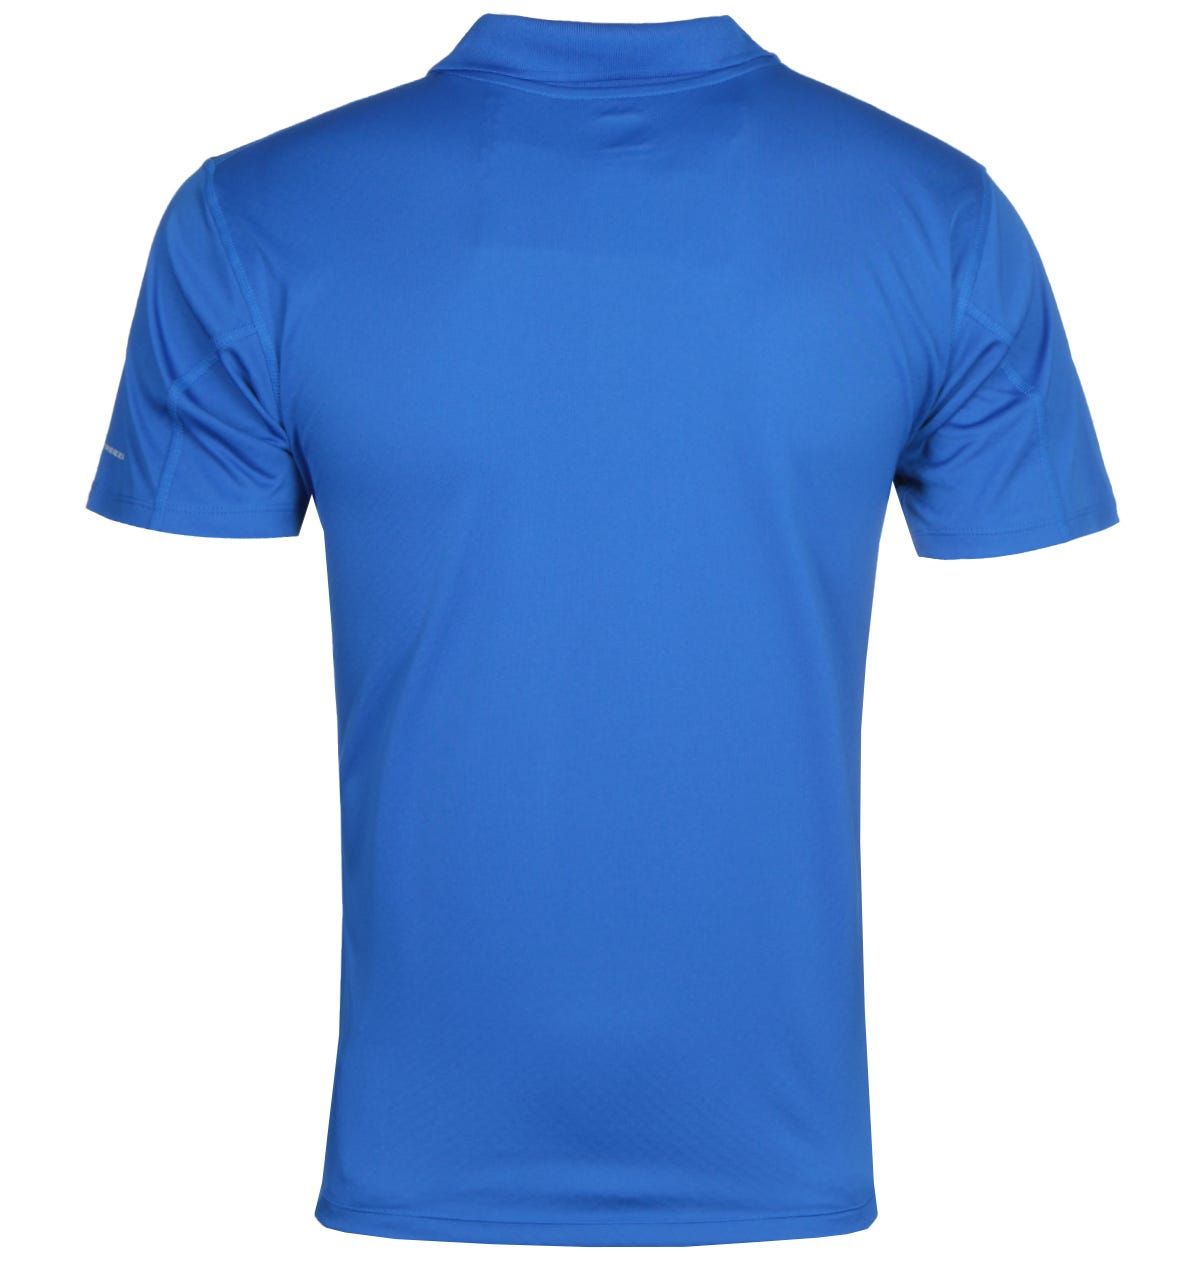 <p>This is the Zero Rules Polo Shirt in Dark Blue by Columbia. Columbia Sportswear is a global outdoor brand based in Portland. They specialise in crafting active lifestyle gear with industry leading technologies. Columbia\'s apparel, footwear, and accessories reflect their Pacific Northwest heritage and indomitable spirit.</p><ul><li>Printed branding</li><li>Omni-Freeze ZERO™ Sweat-Activated Super Cooling</li><li>Omni-Shade™ UPF 30 Sun Protection</li><li>Comfort stretch fabric</li></ul><p>Style & Fit</p><ul><li>Active Fit: Body skimming fit with end-use mobility in mind</li></ul><p>Composition & Care</p><ul><li>100% Polyester </li><li>Machine Wash</li></ul>